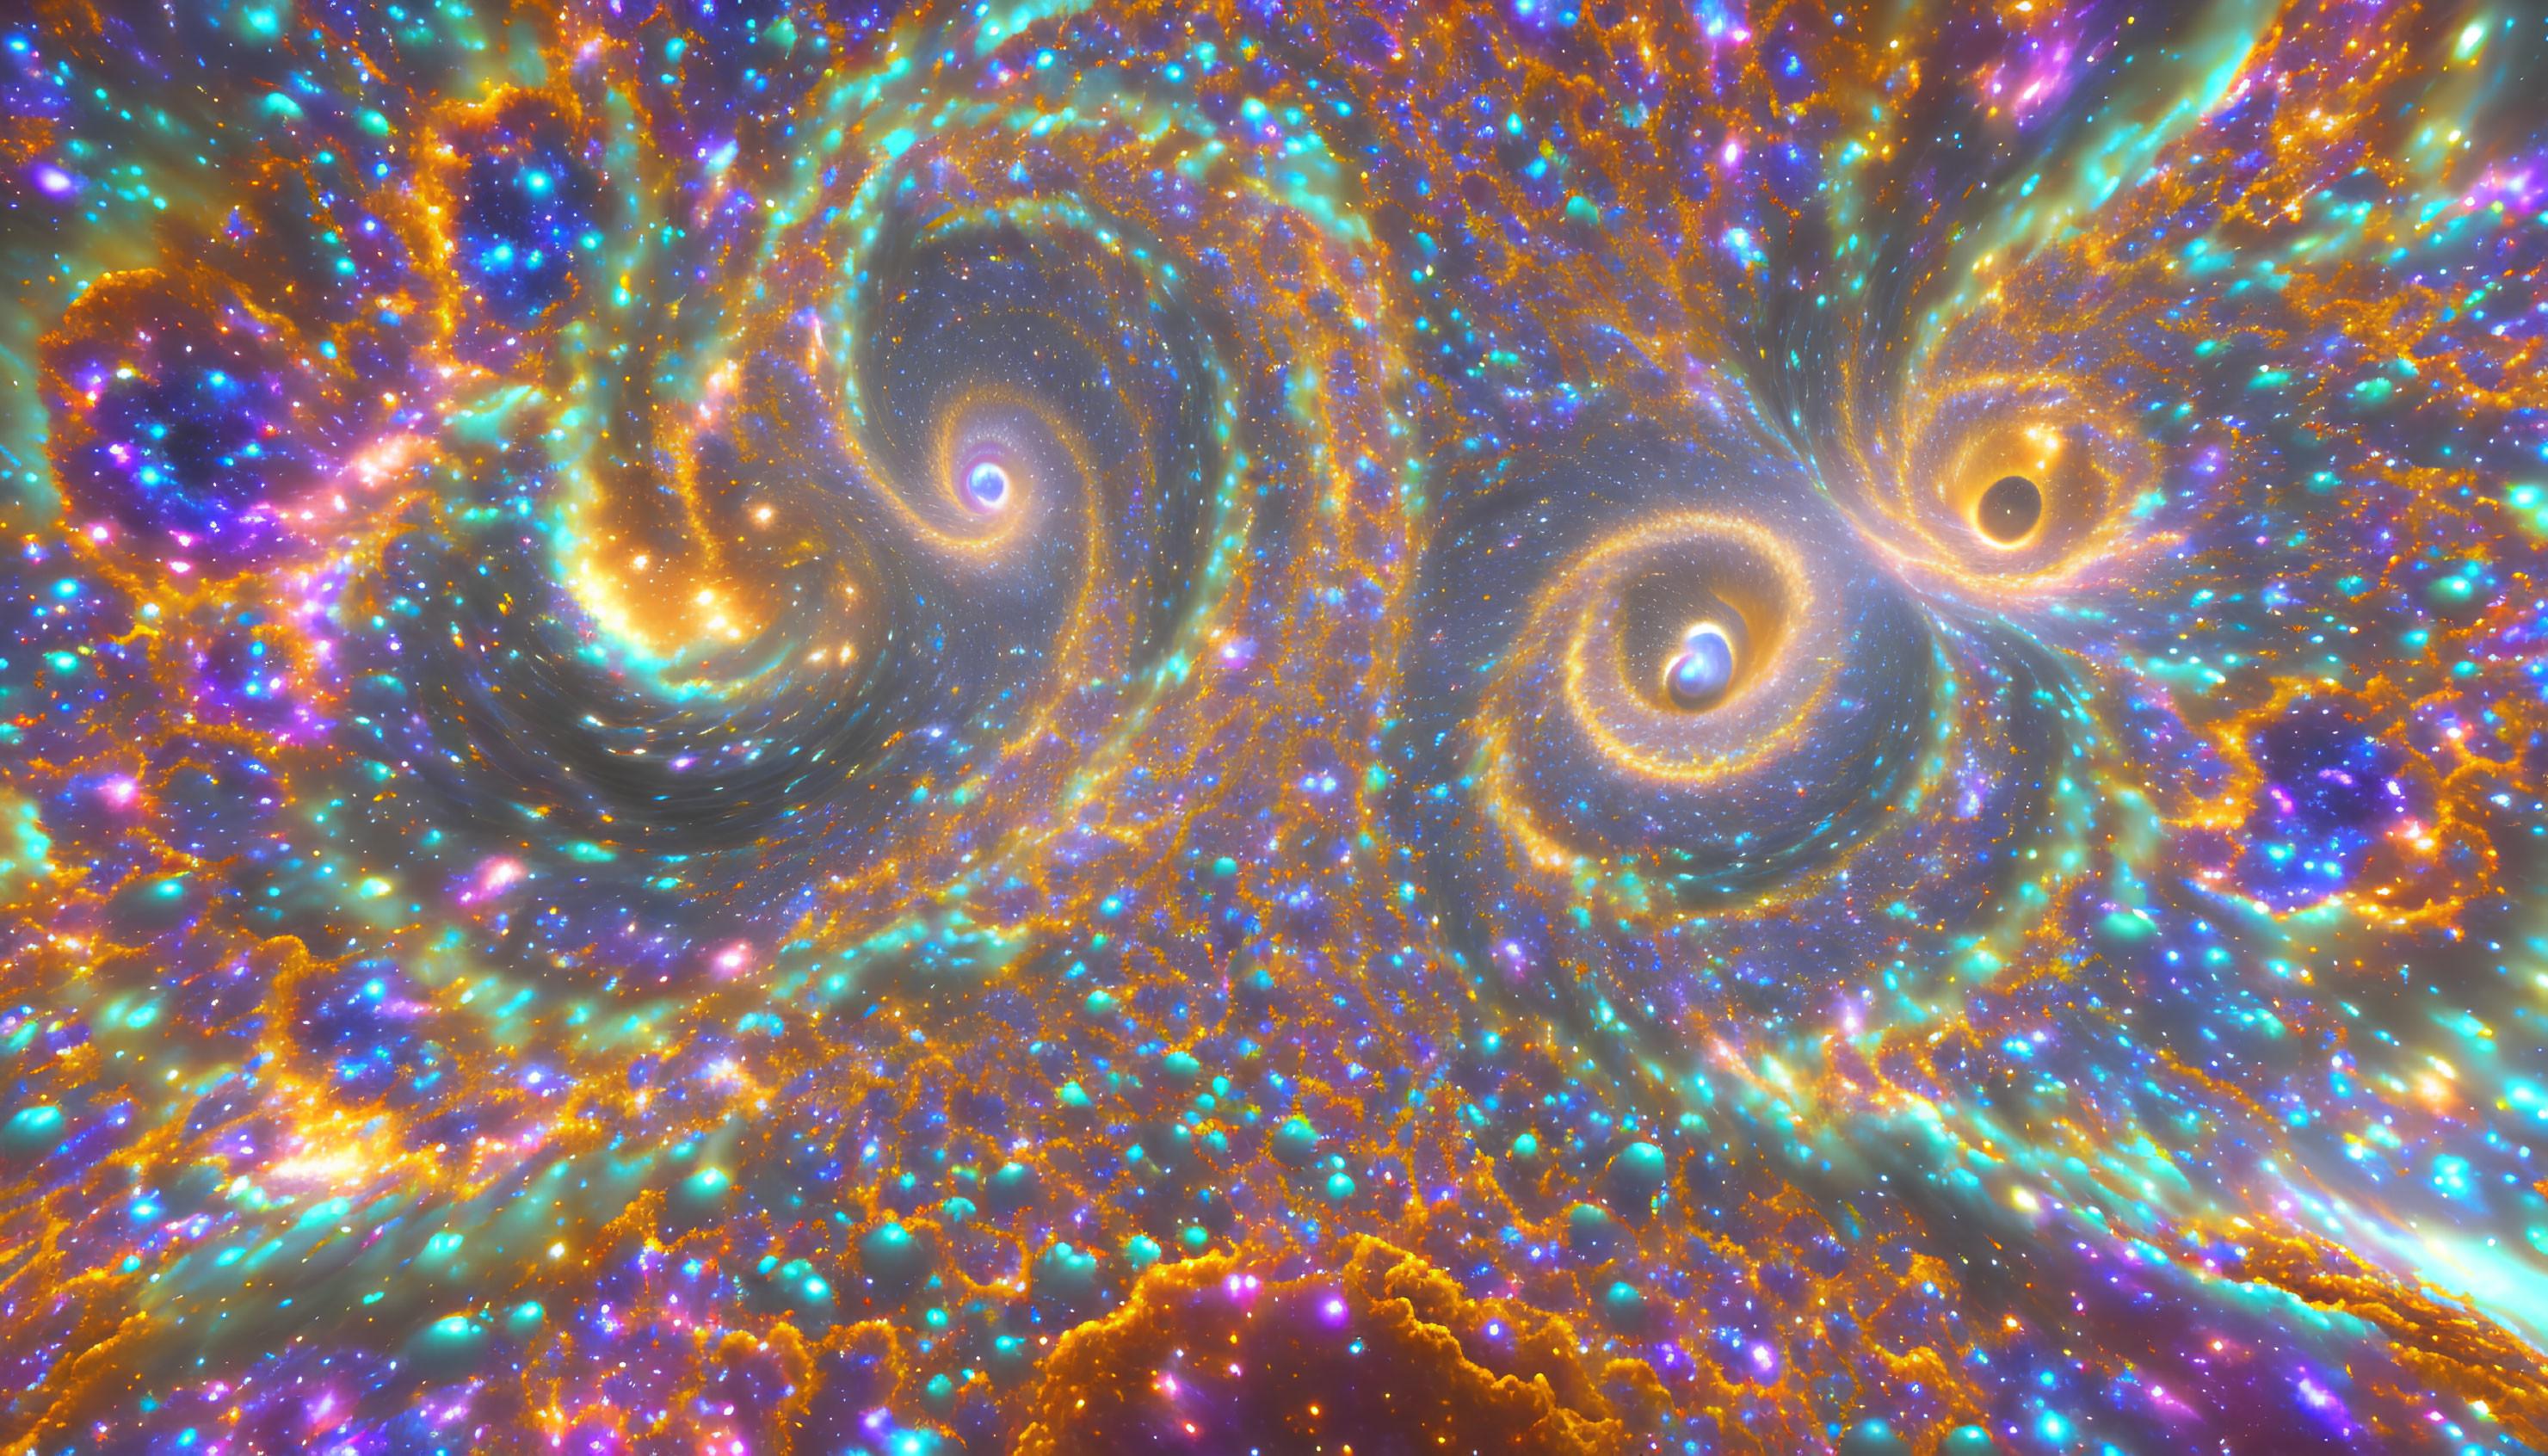 Colorful Cosmic Digital Art with Swirling Patterns in Orange, Blue, and Pink